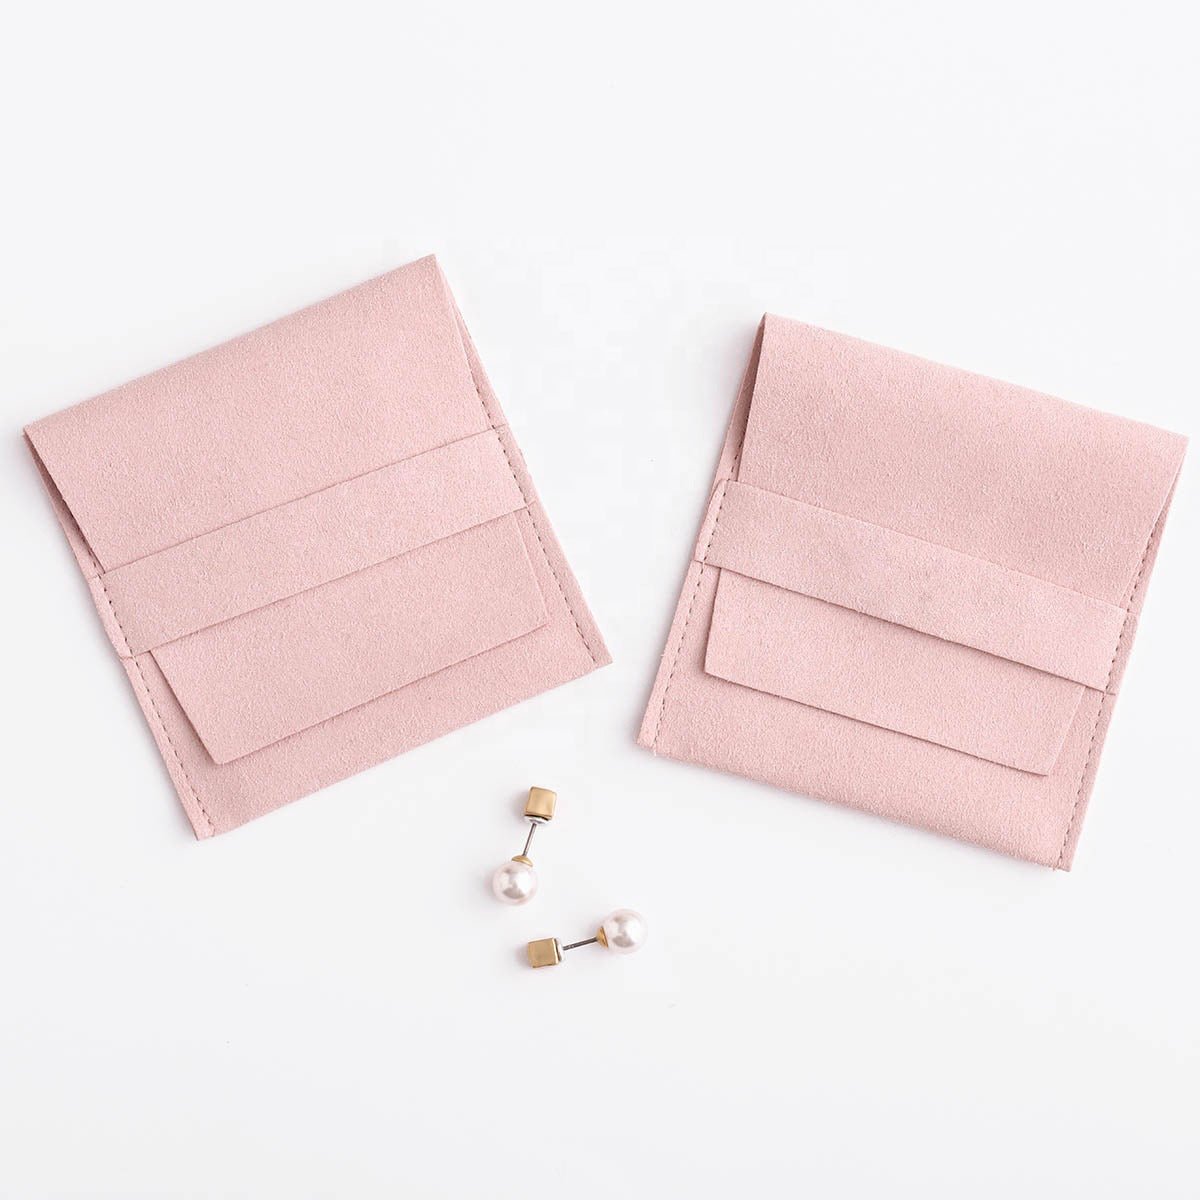 custom microfiber pouch microfiber jewelry pouch microfiber pouch Microfiber Jewelry Pouch Luxury Small Jewelry Gift Bag Necklace Earrings Rings Package with Band, Pink YIFU DISPLAY